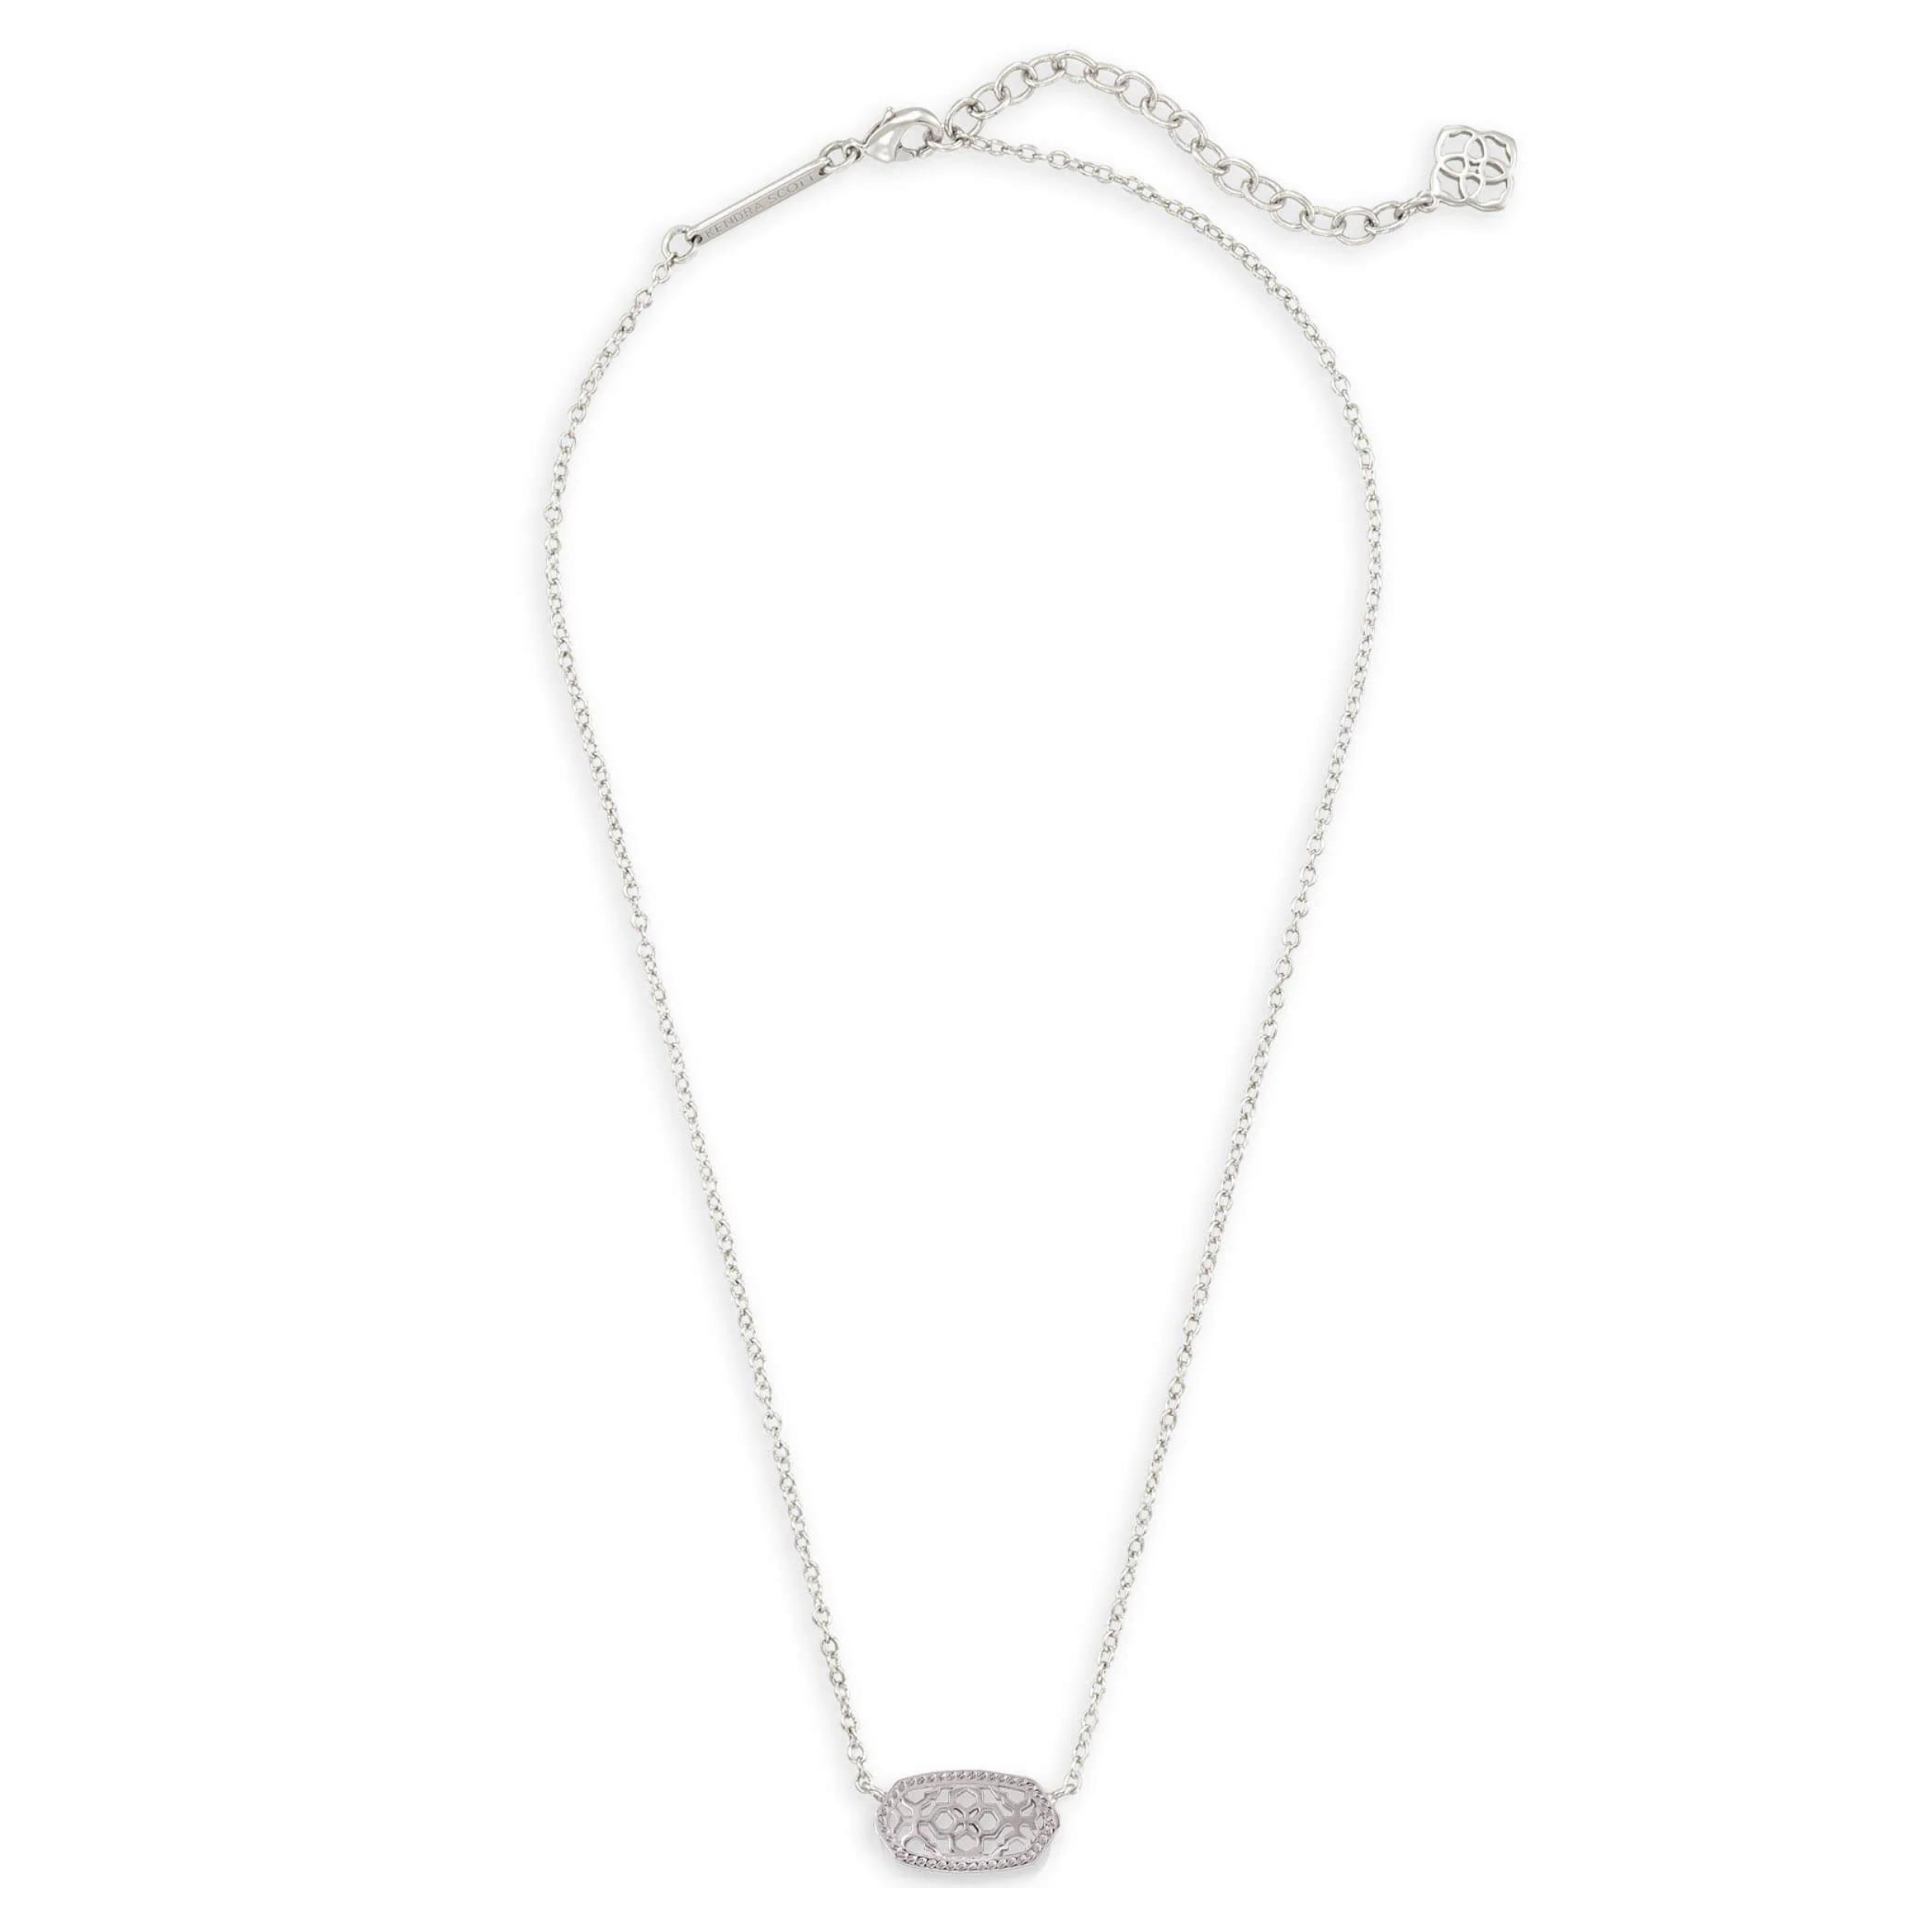 Kendra Scott | Elisa Pendant Necklace in Silver Filigree - Giddy Up Glamour Boutique